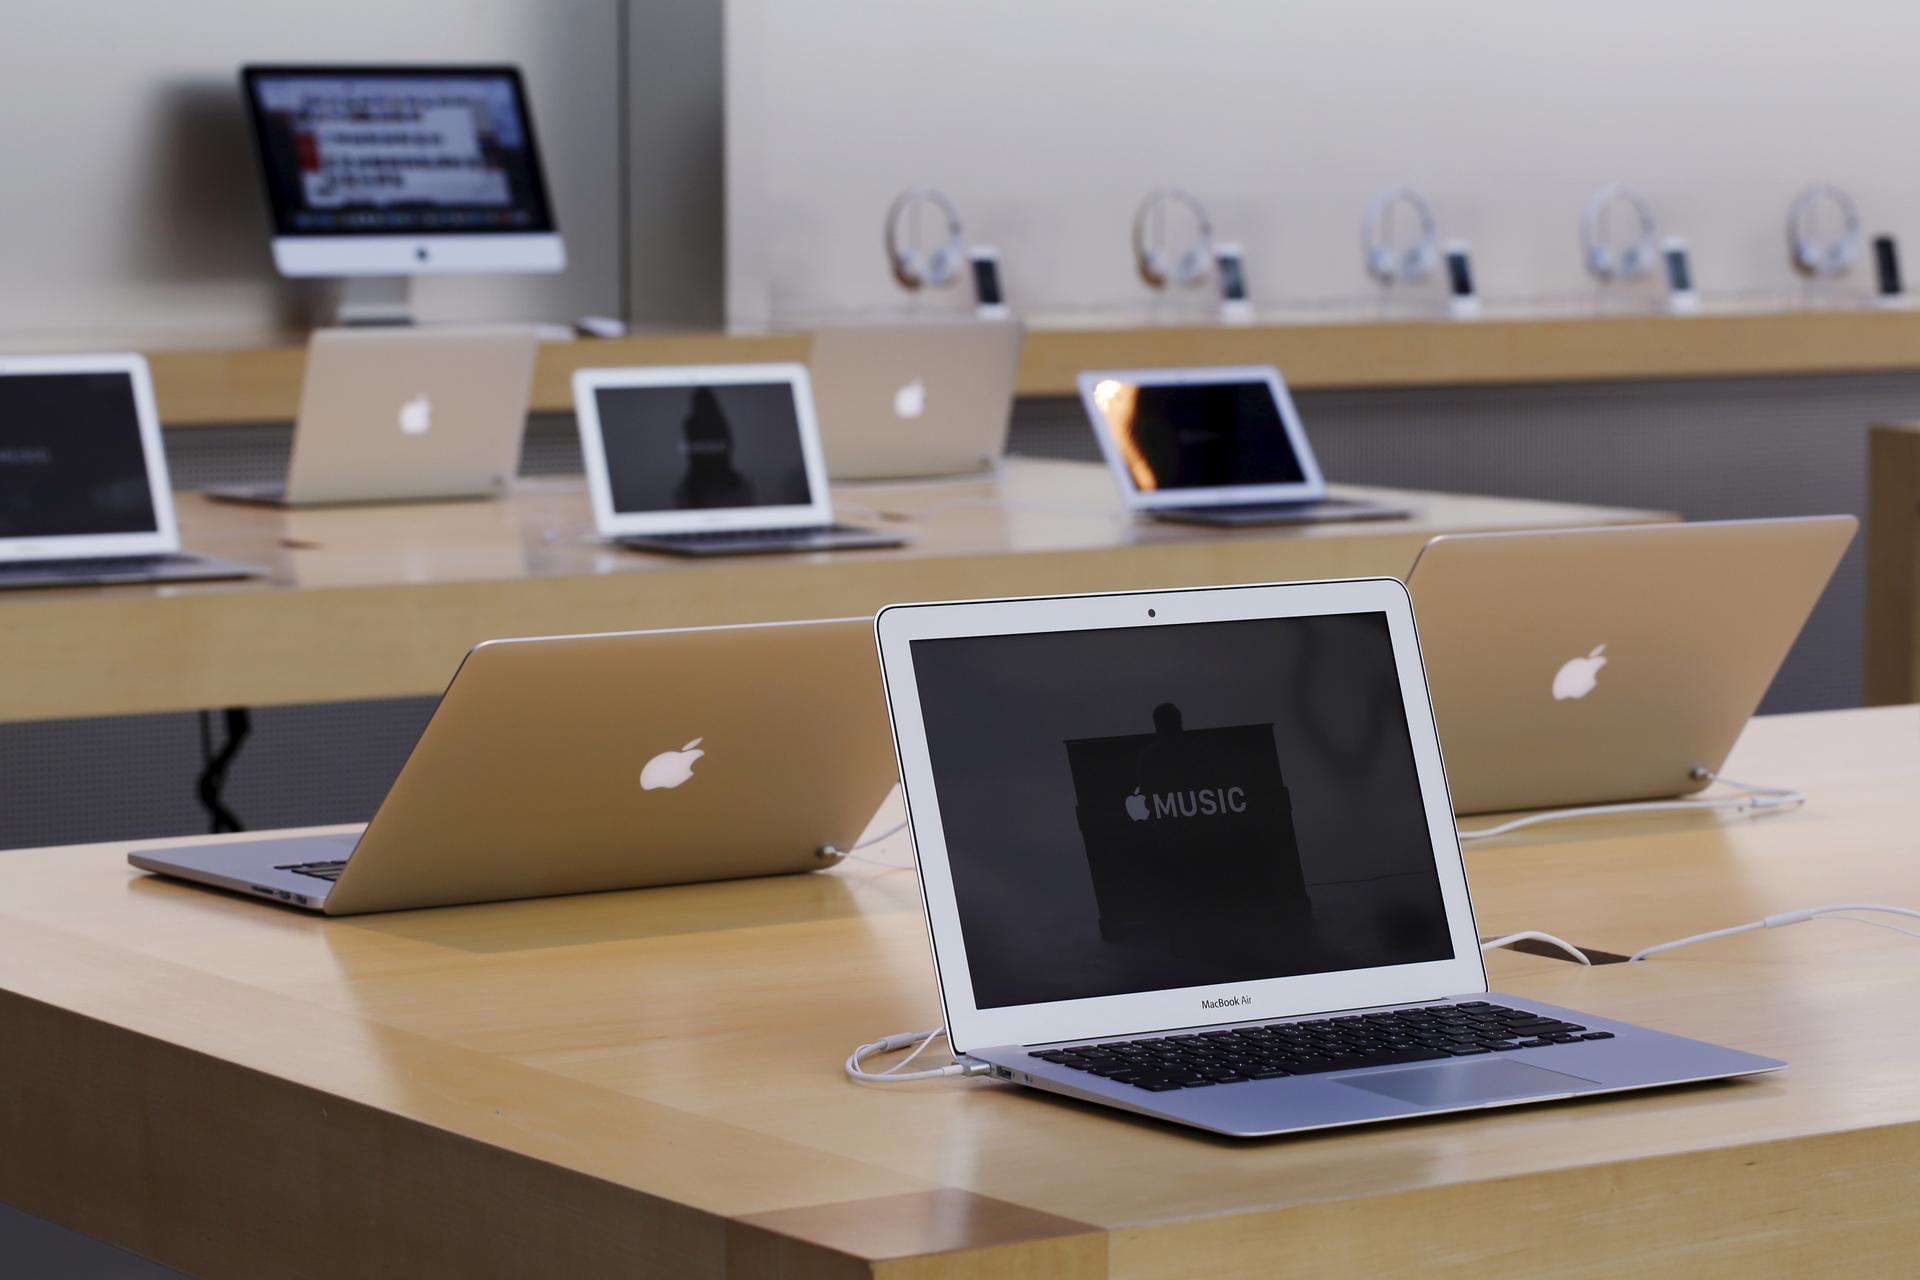 Rows of Apple laptop computers